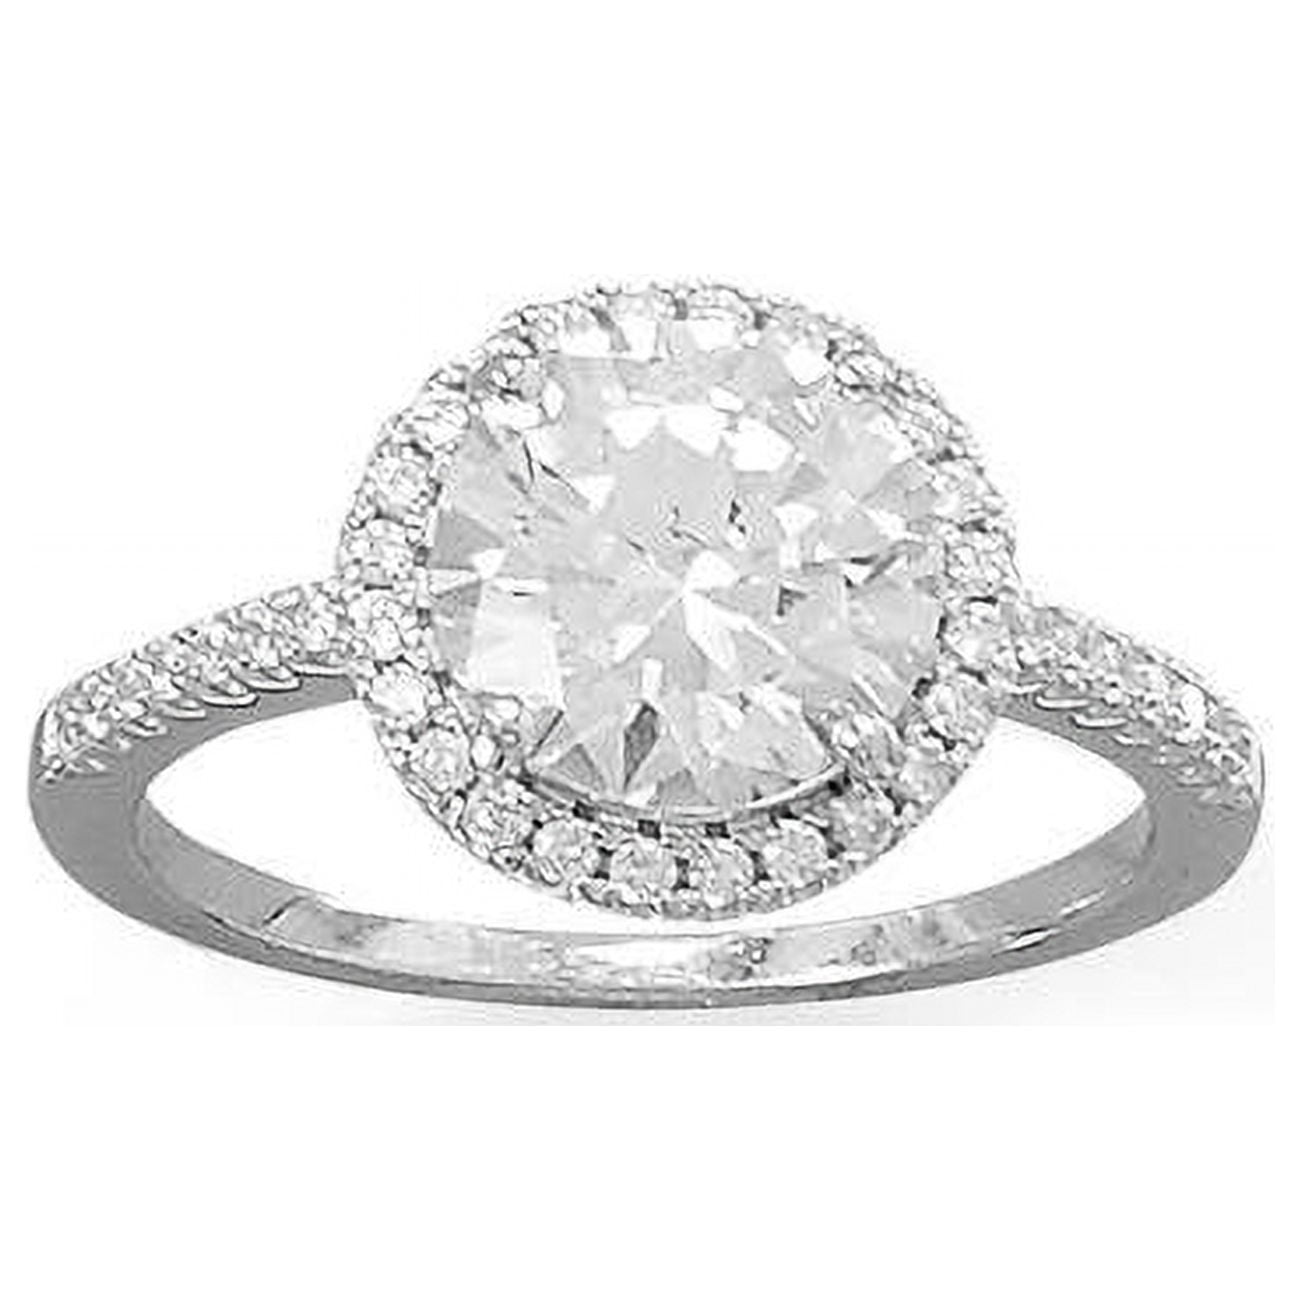 Picture of Precious Stars 83806-10 Sterling Silver Round-Cut Cubic Zirconia Halo Engagement Ring - Size 10